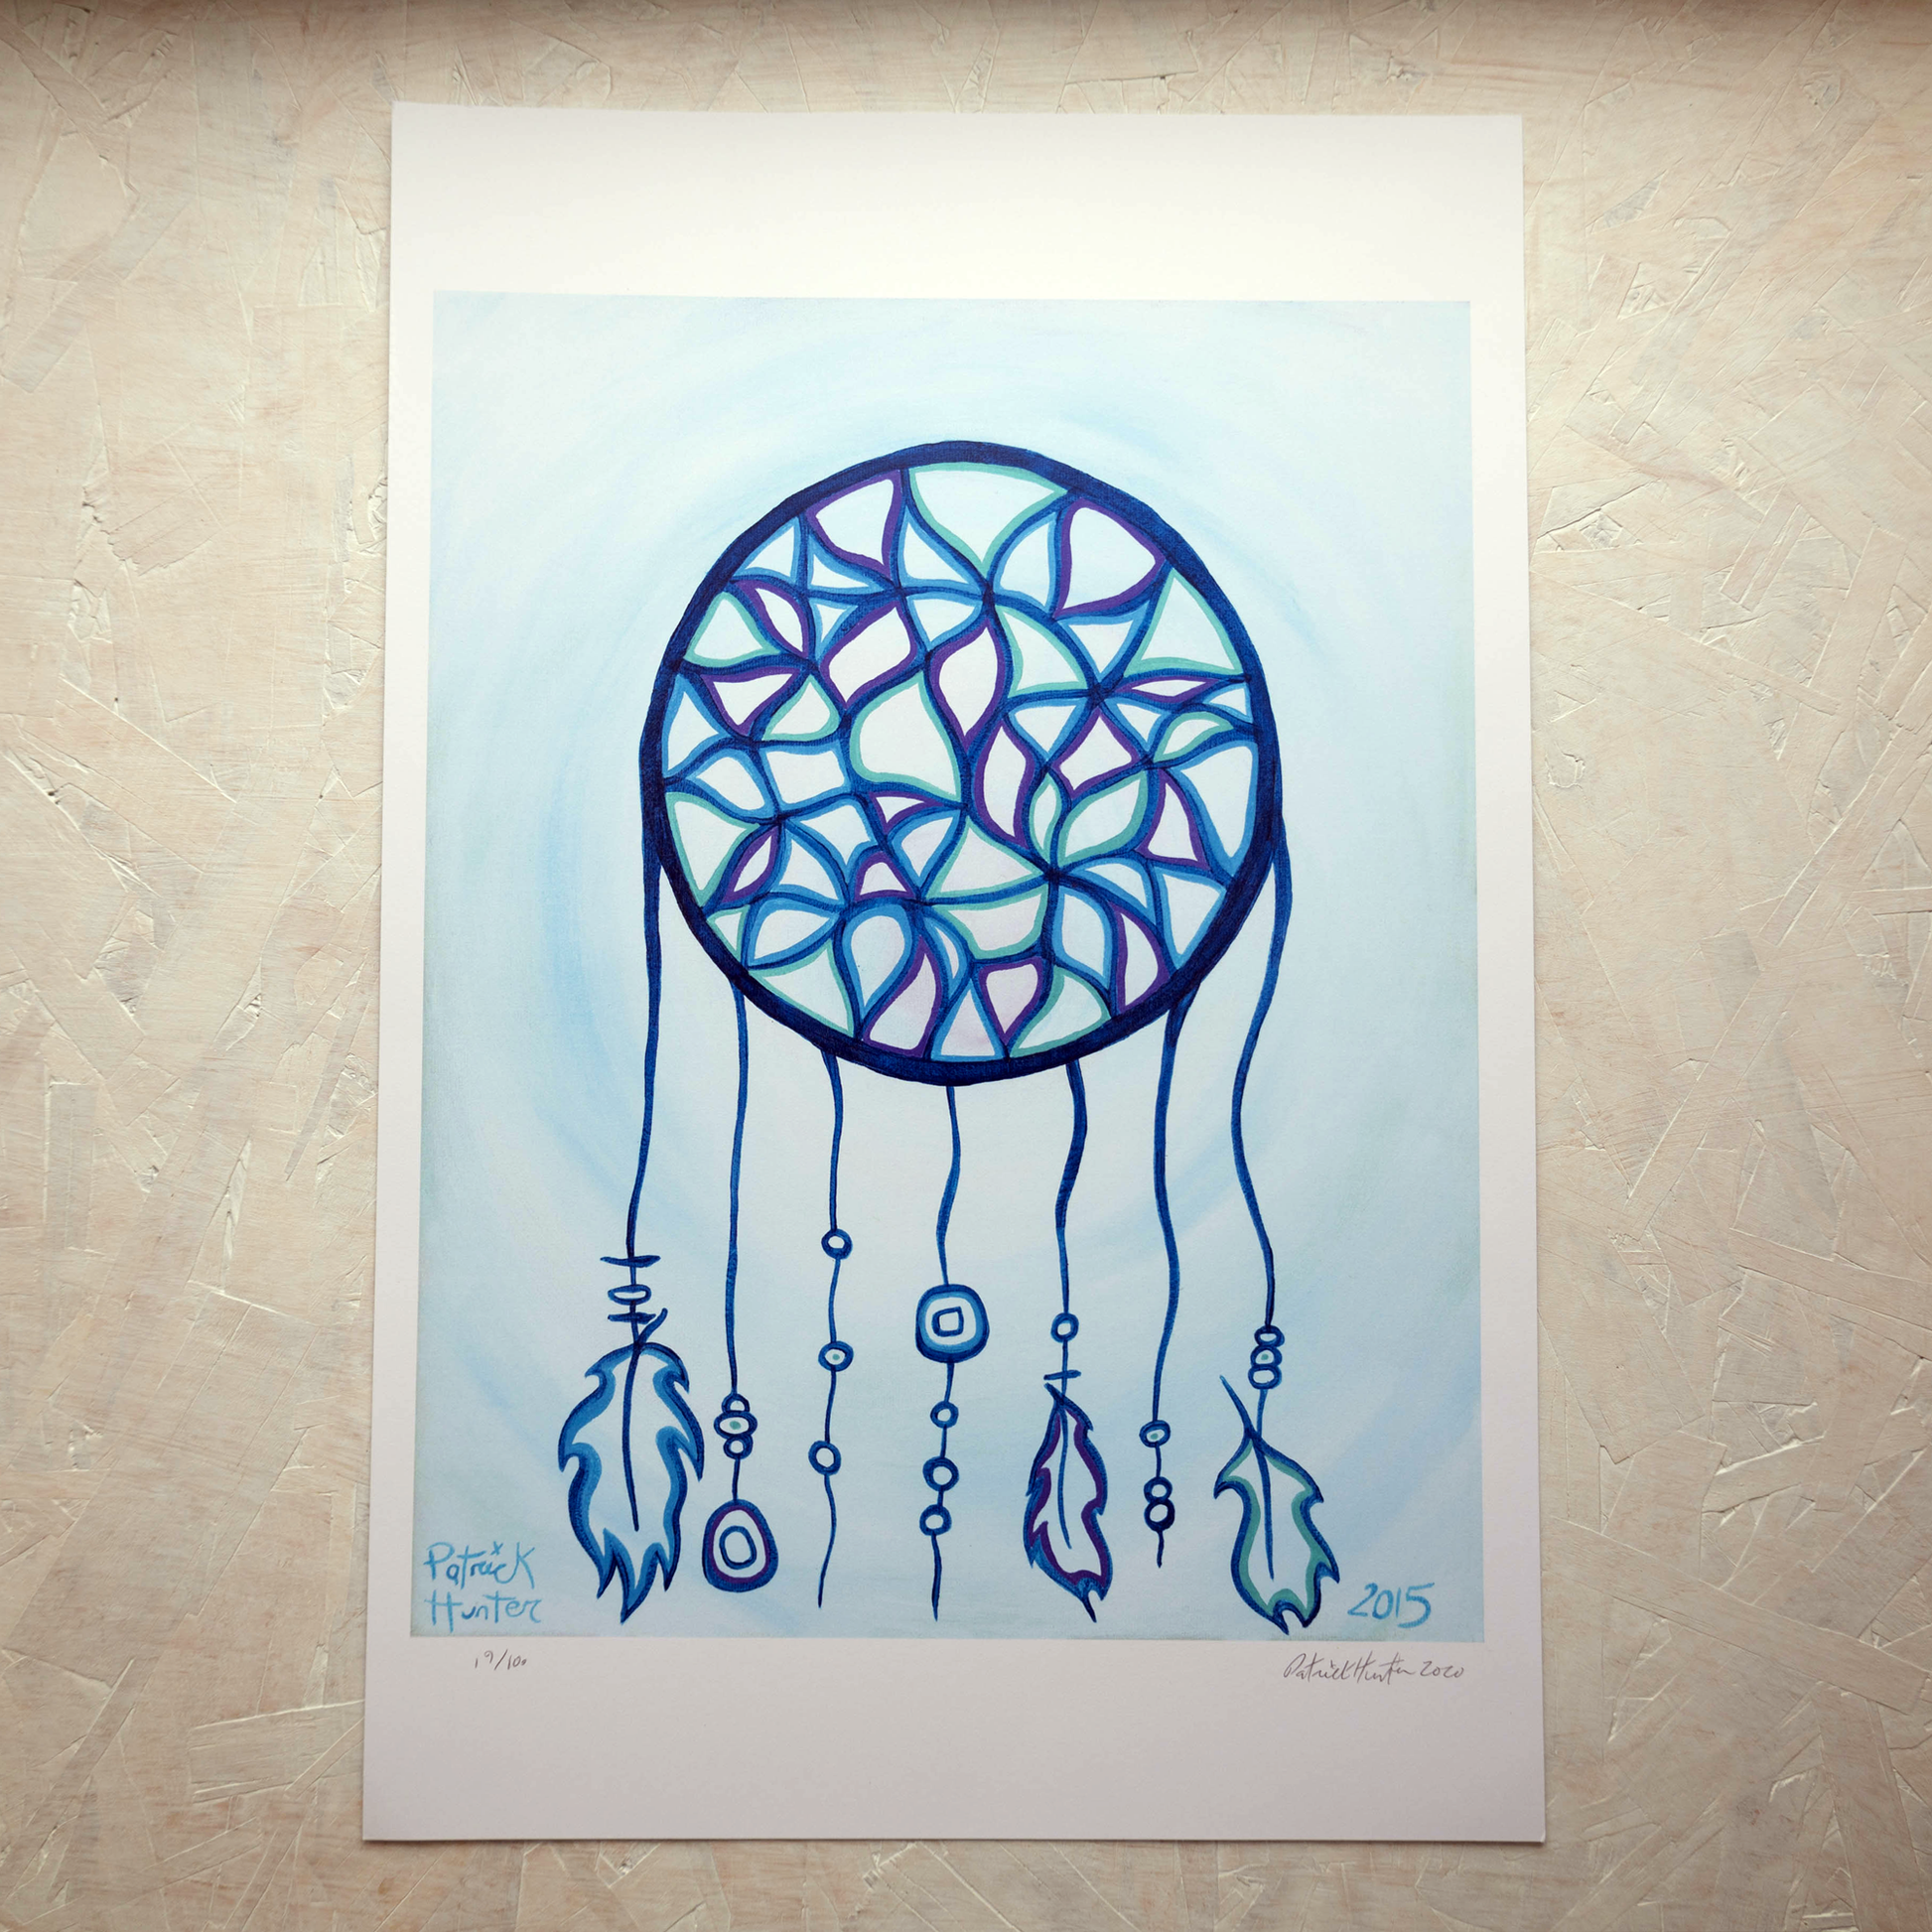 Print of Patrick Hunter's painting of a dreamcatcher in blues and purples on light blue background in woodland art style.